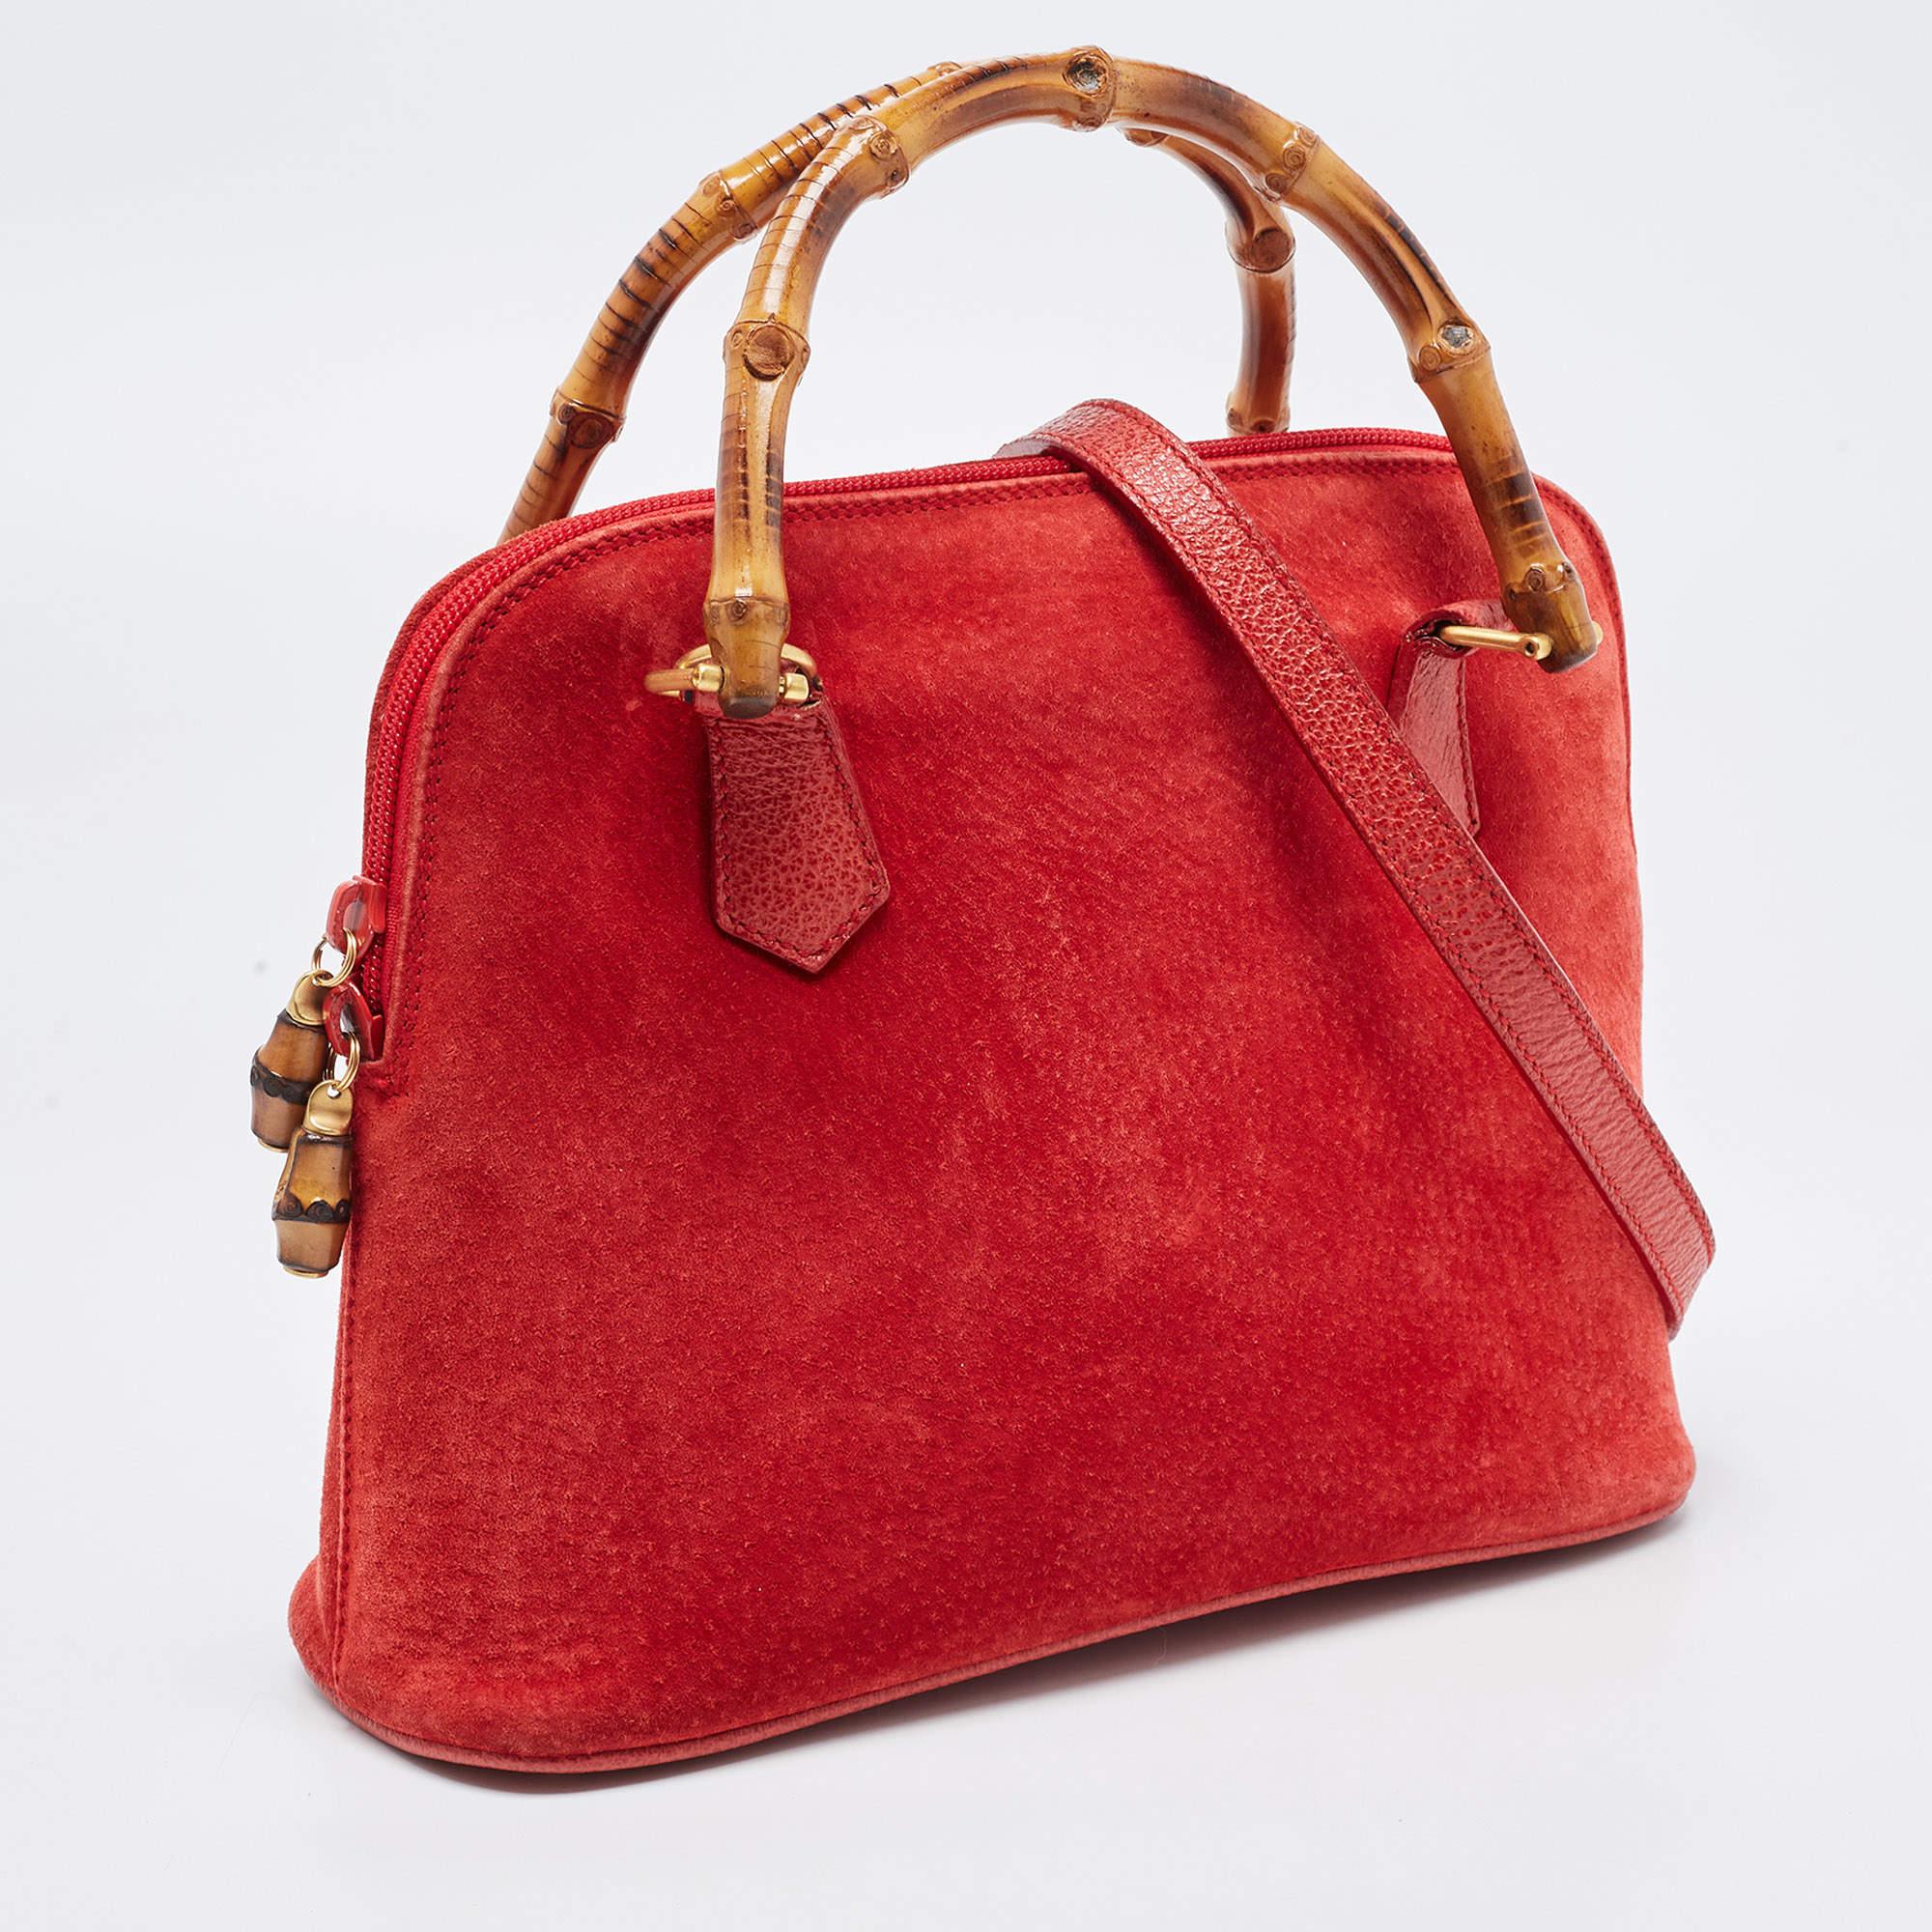 Gucci Red Suede and Leather Bamboo Handle Satchel In Good Condition For Sale In Dubai, Al Qouz 2